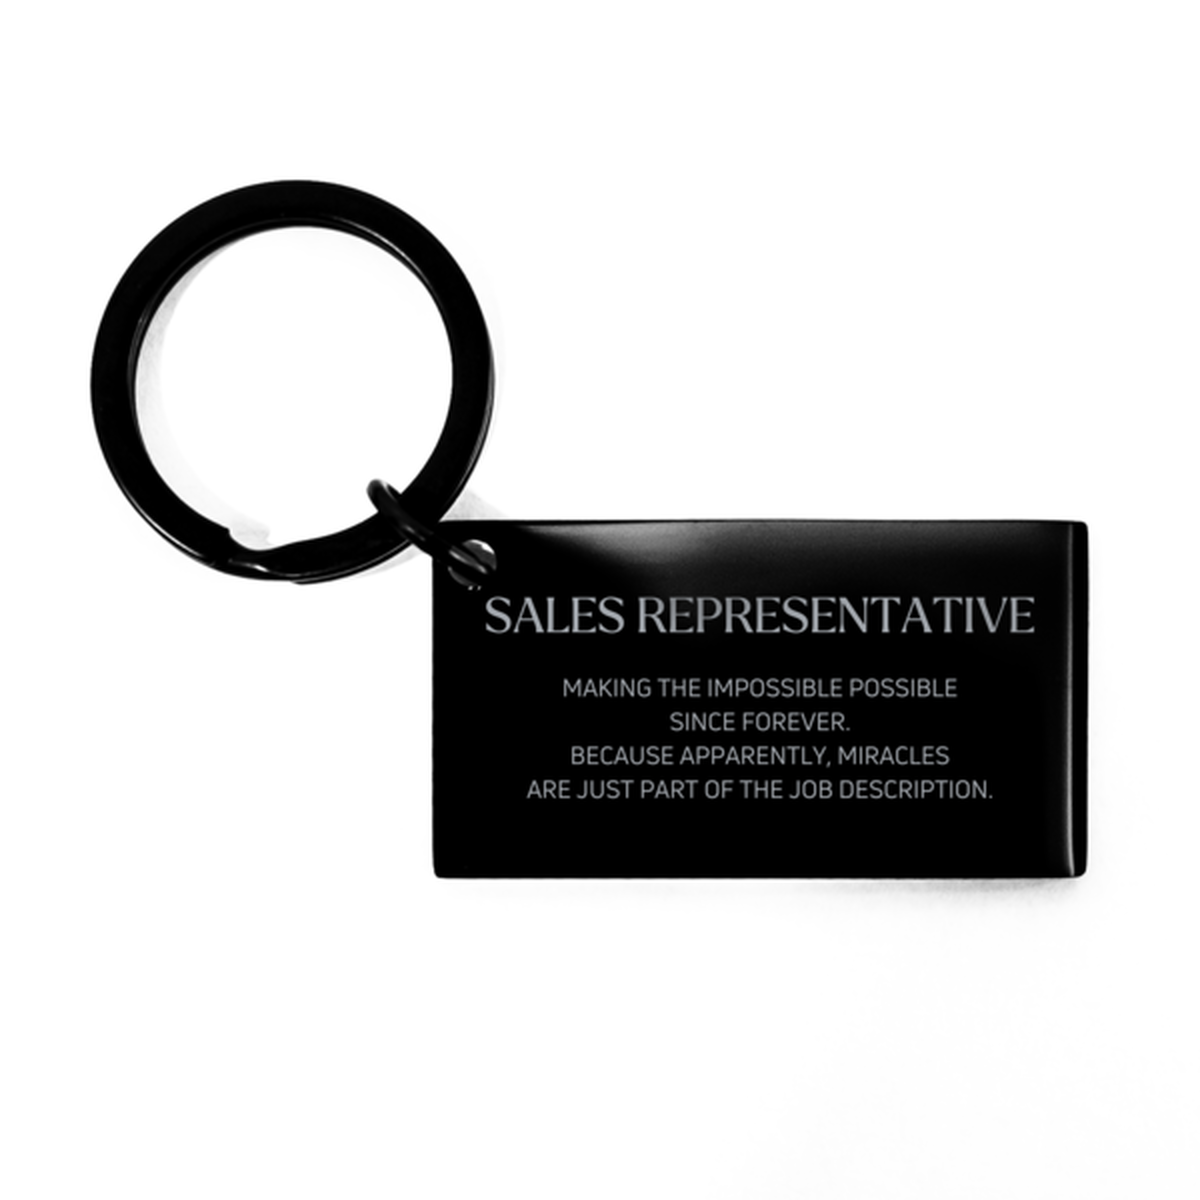 Funny Sales Representative Gifts, Miracles are just part of the job description, Inspirational Birthday Keychain For Sales Representative, Men, Women, Coworkers, Friends, Boss